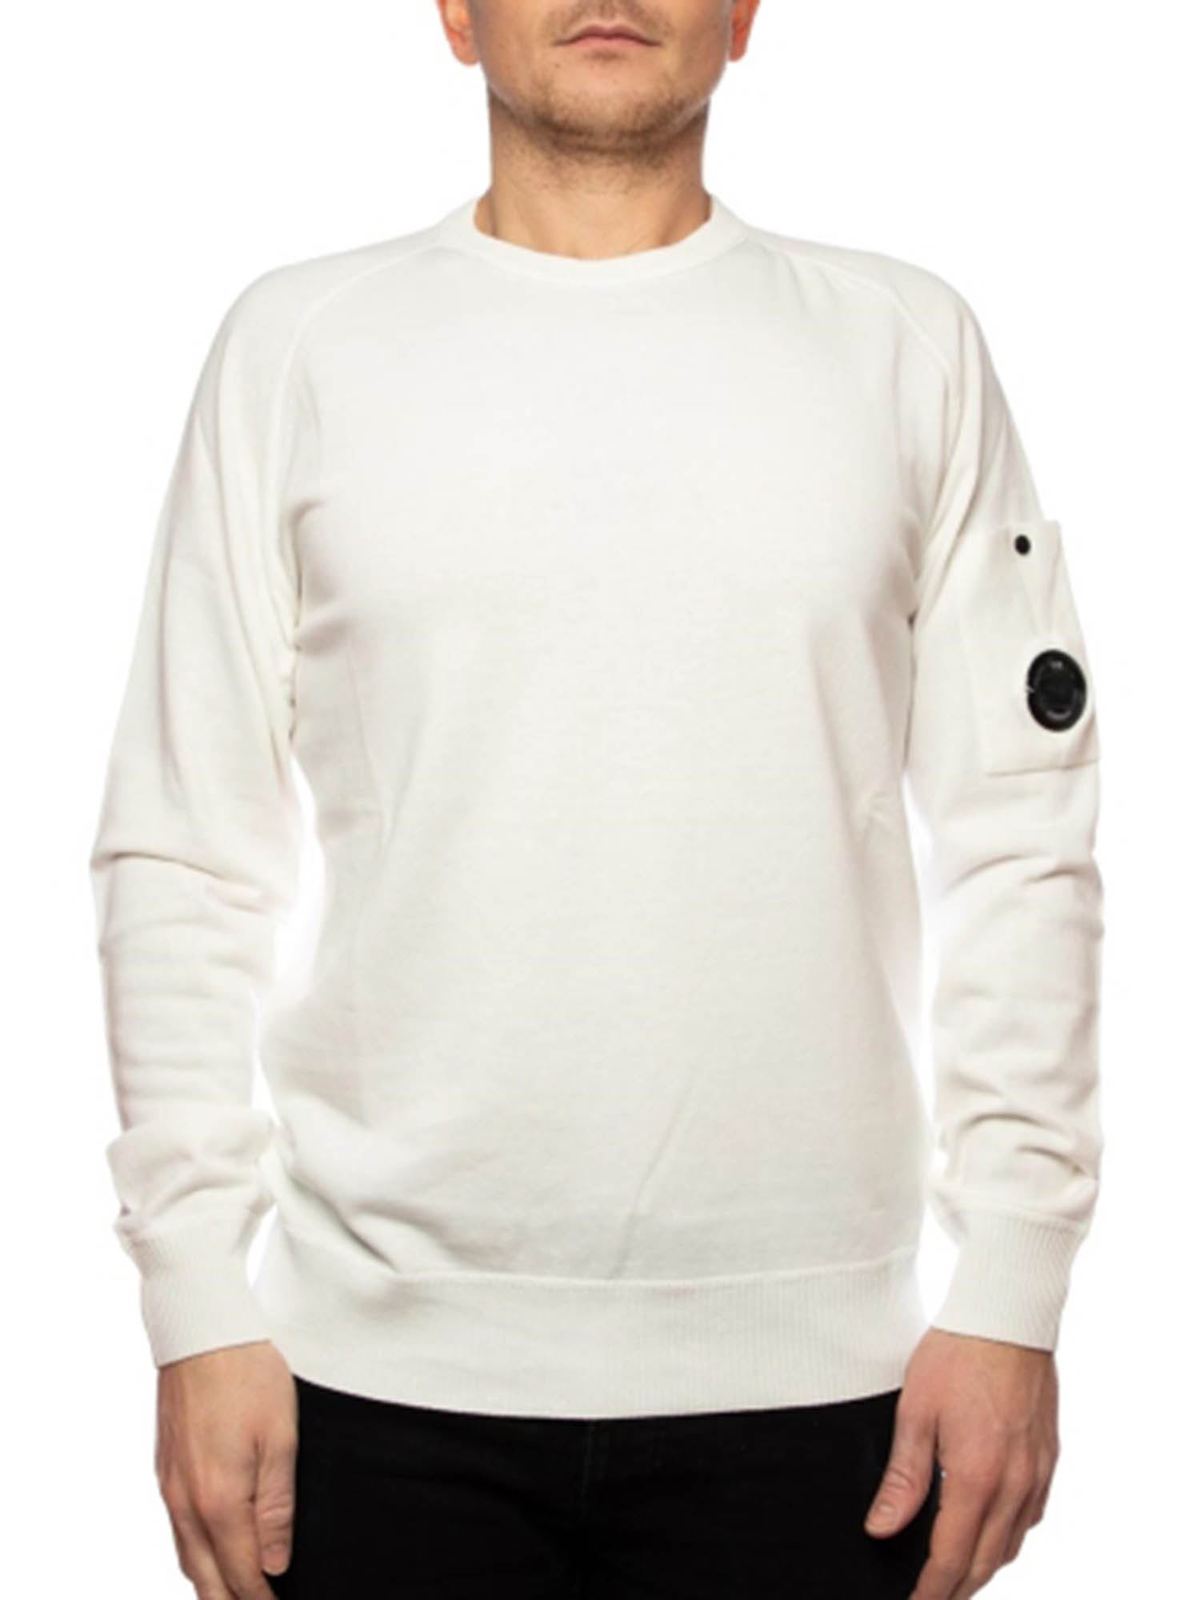 C.P. COMPANY CREPE GARMENT DYED jumper IN WHITE